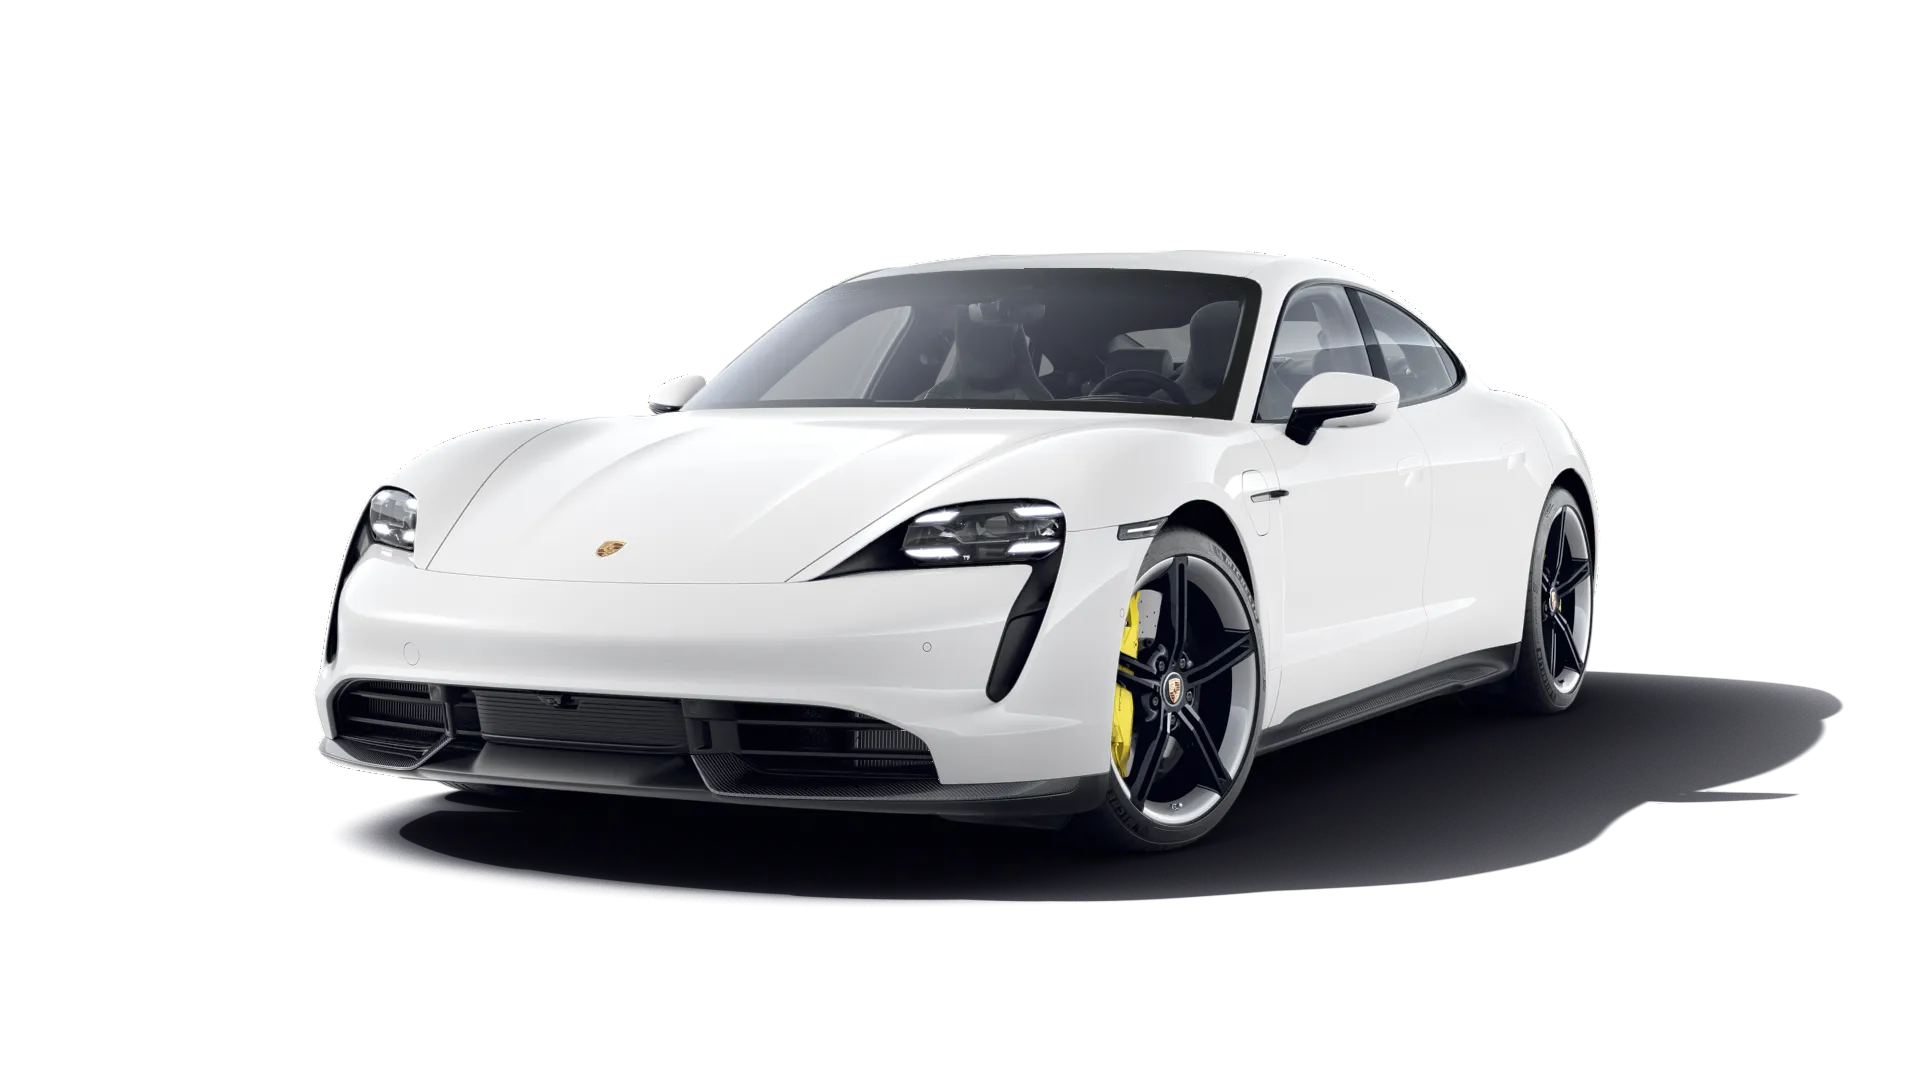 Exterior view of Taycan Turbo S